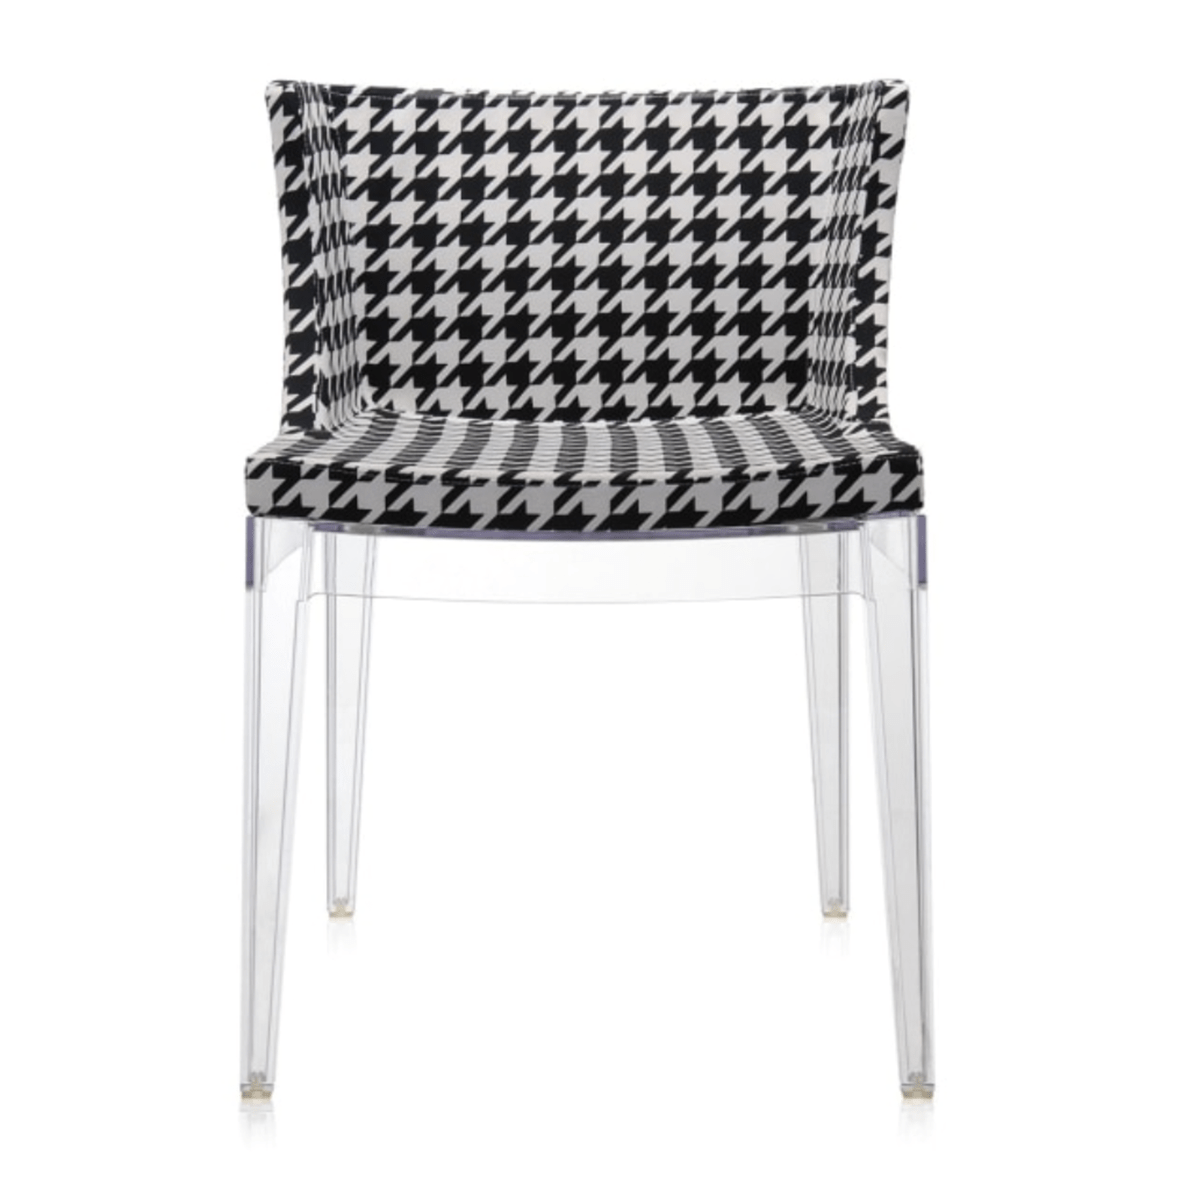 A black and white check chair with transparent legs.